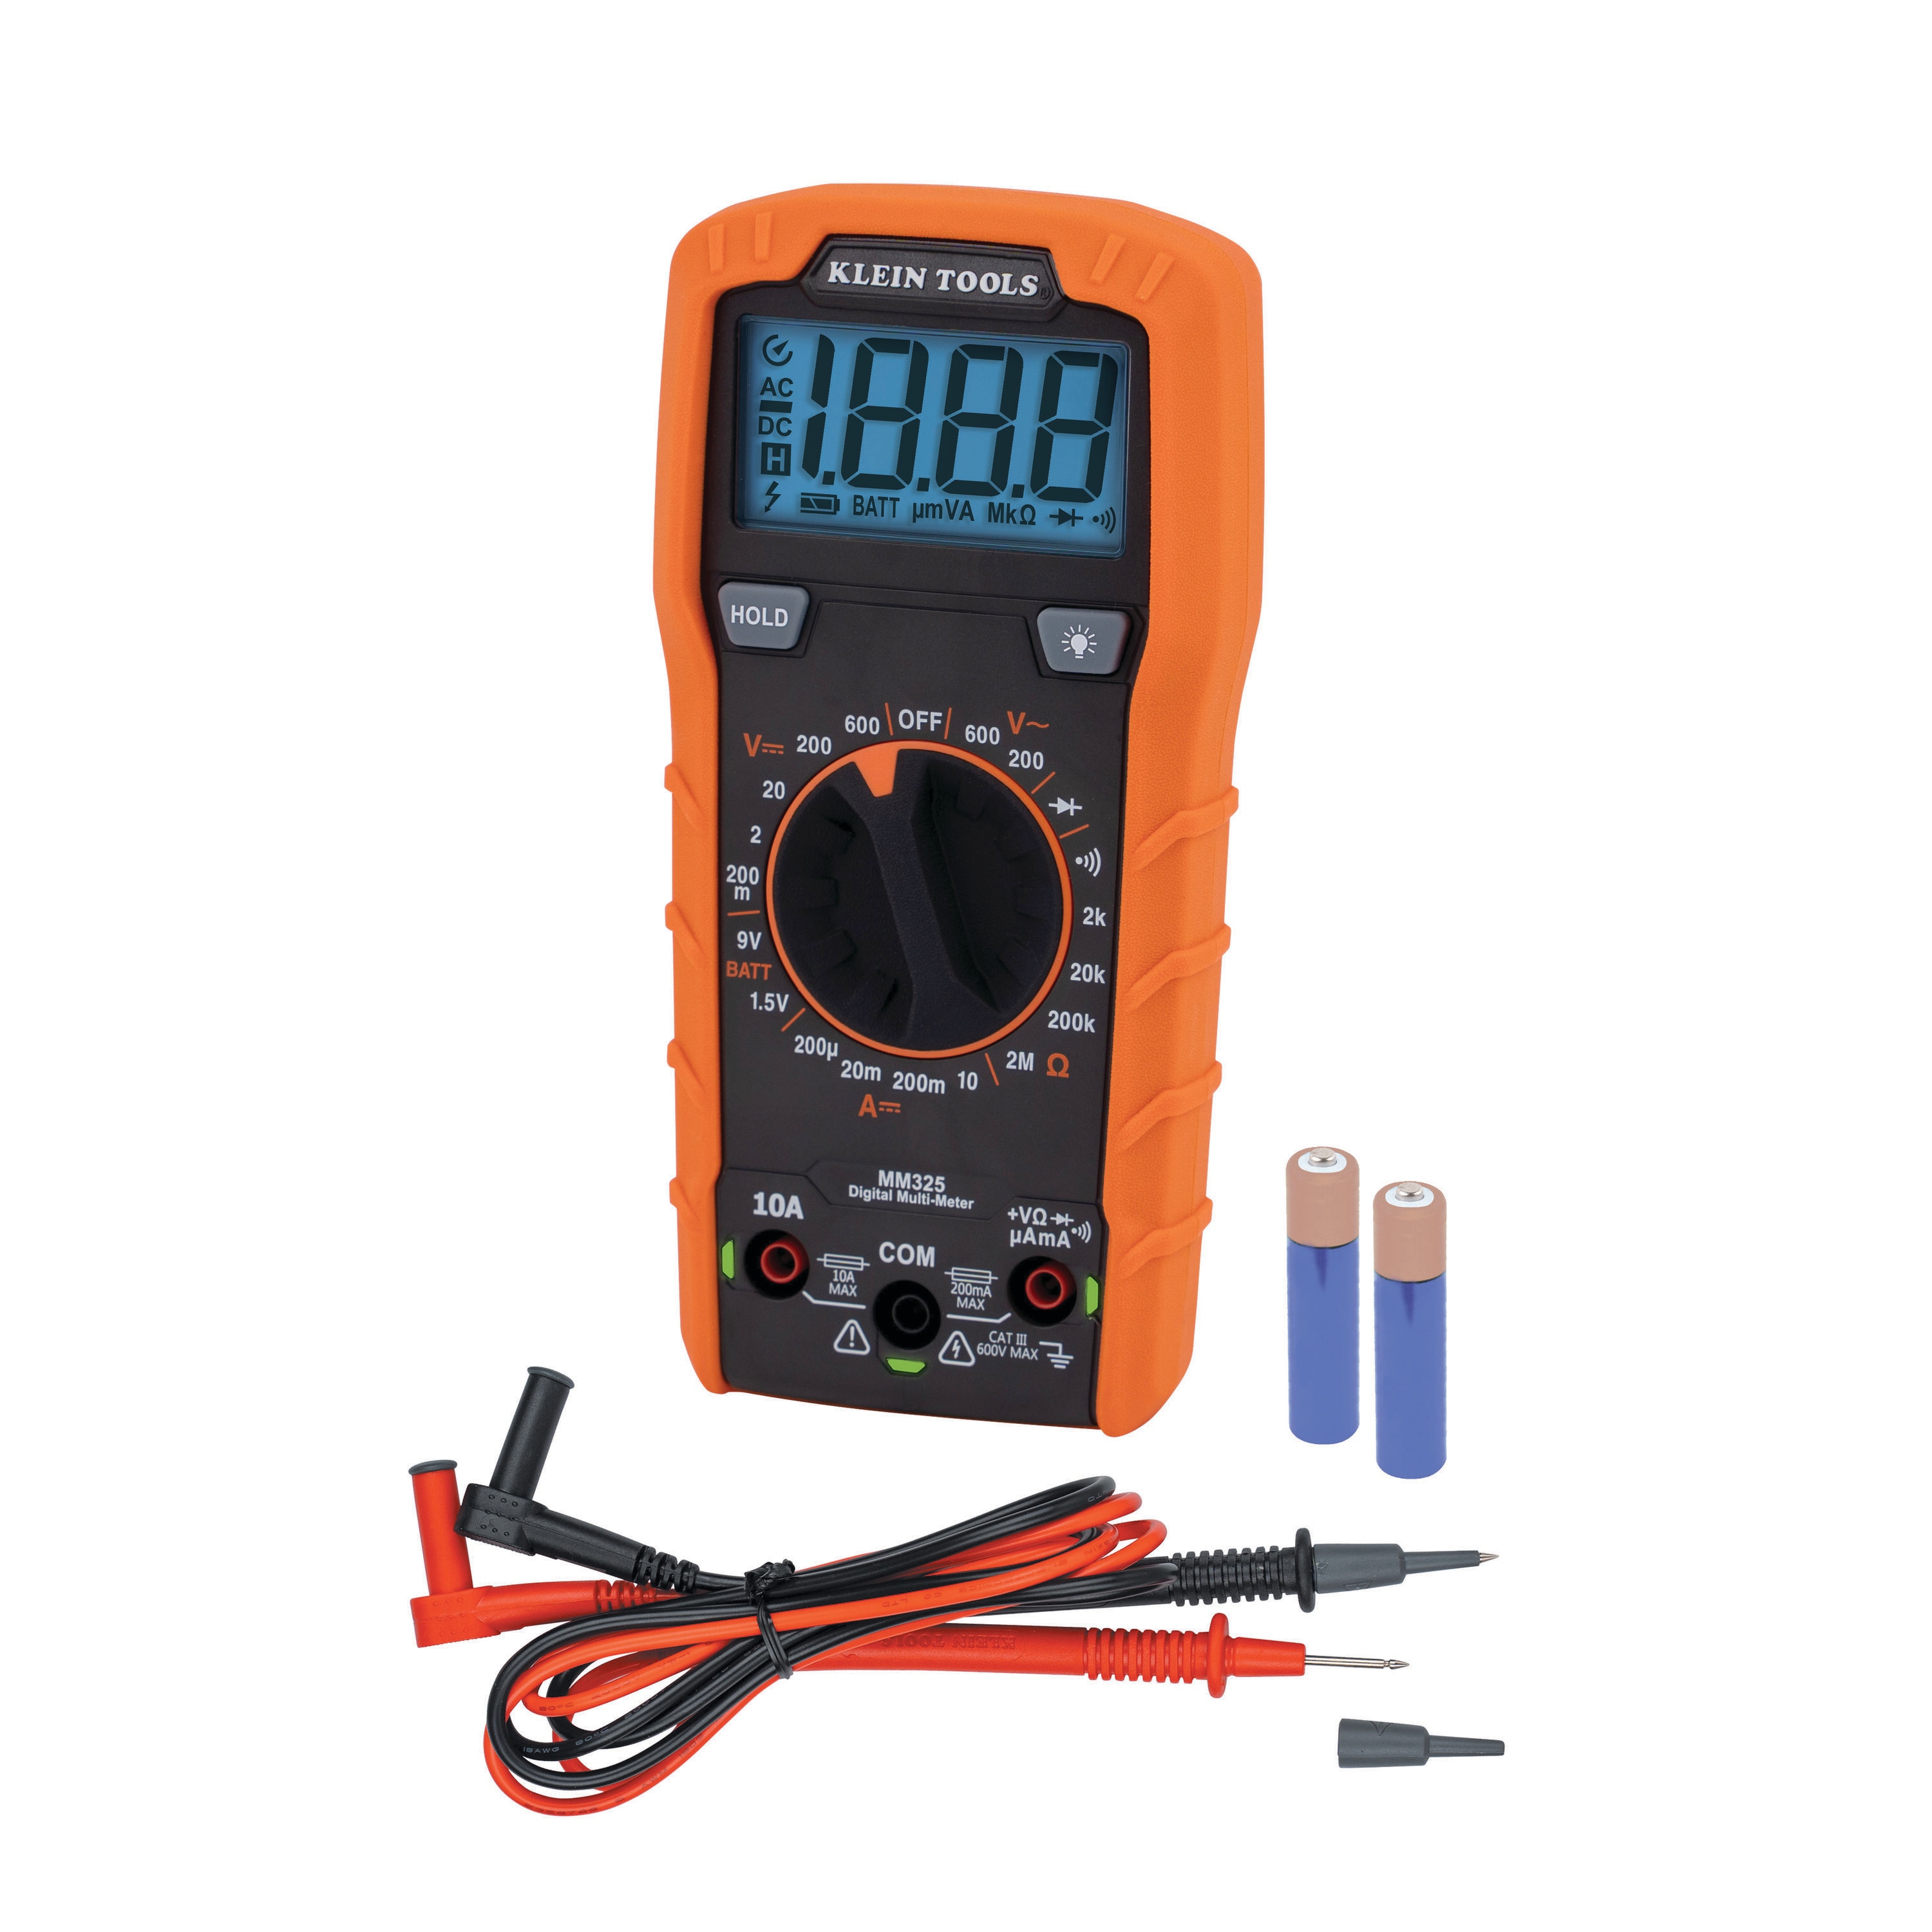 IDEAL Non-contact Lcd Ac/Dc Multimeter 10 Amp 1000-Volt in the